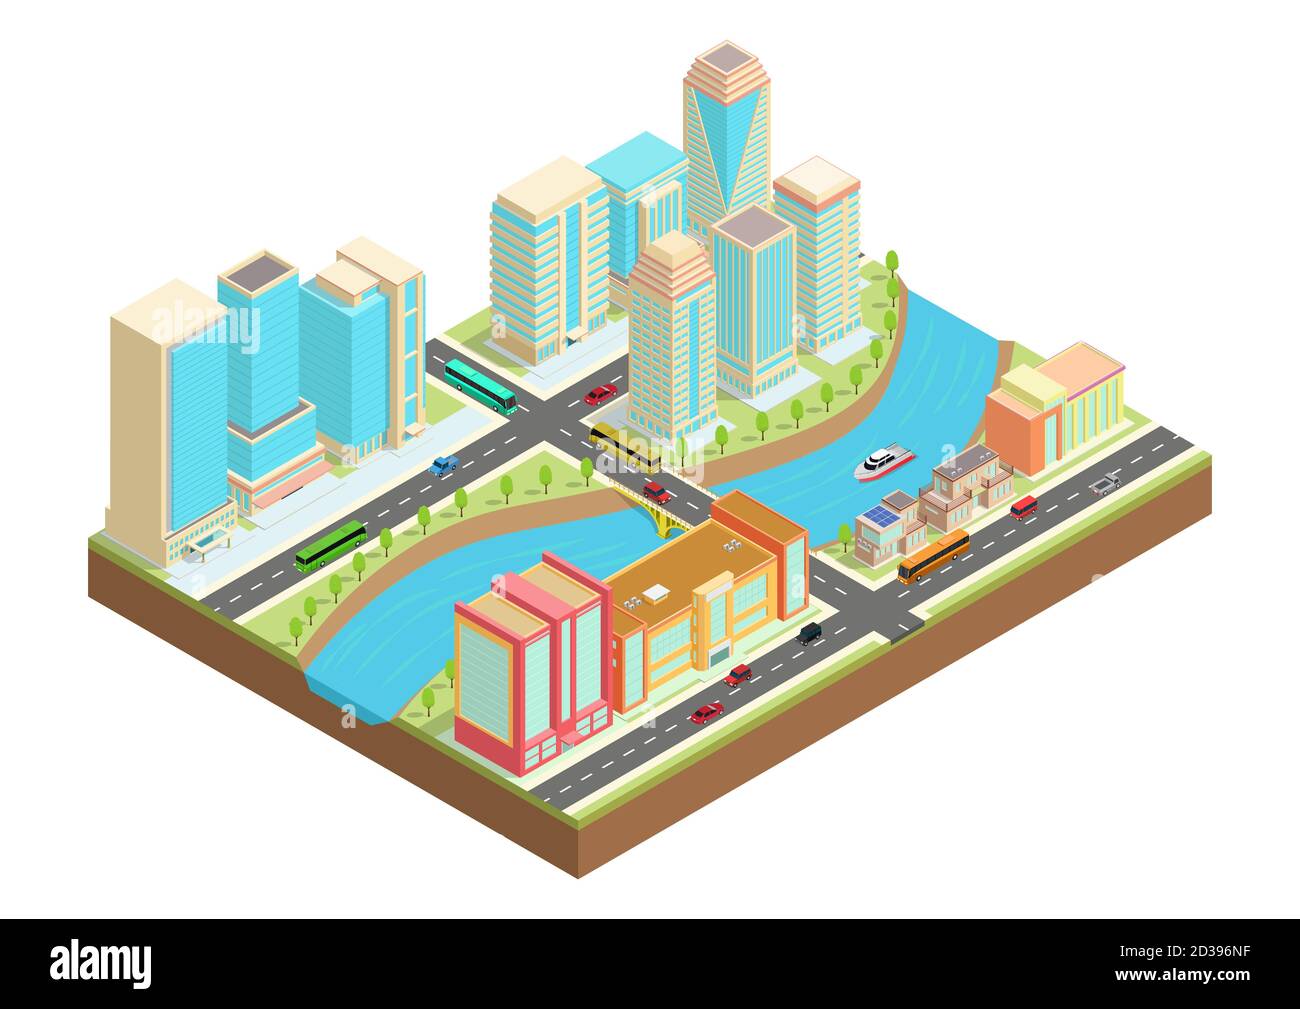 Isometric illustration of a city with a river, cars, yachts, and urban buildings and houses. Stock Photo